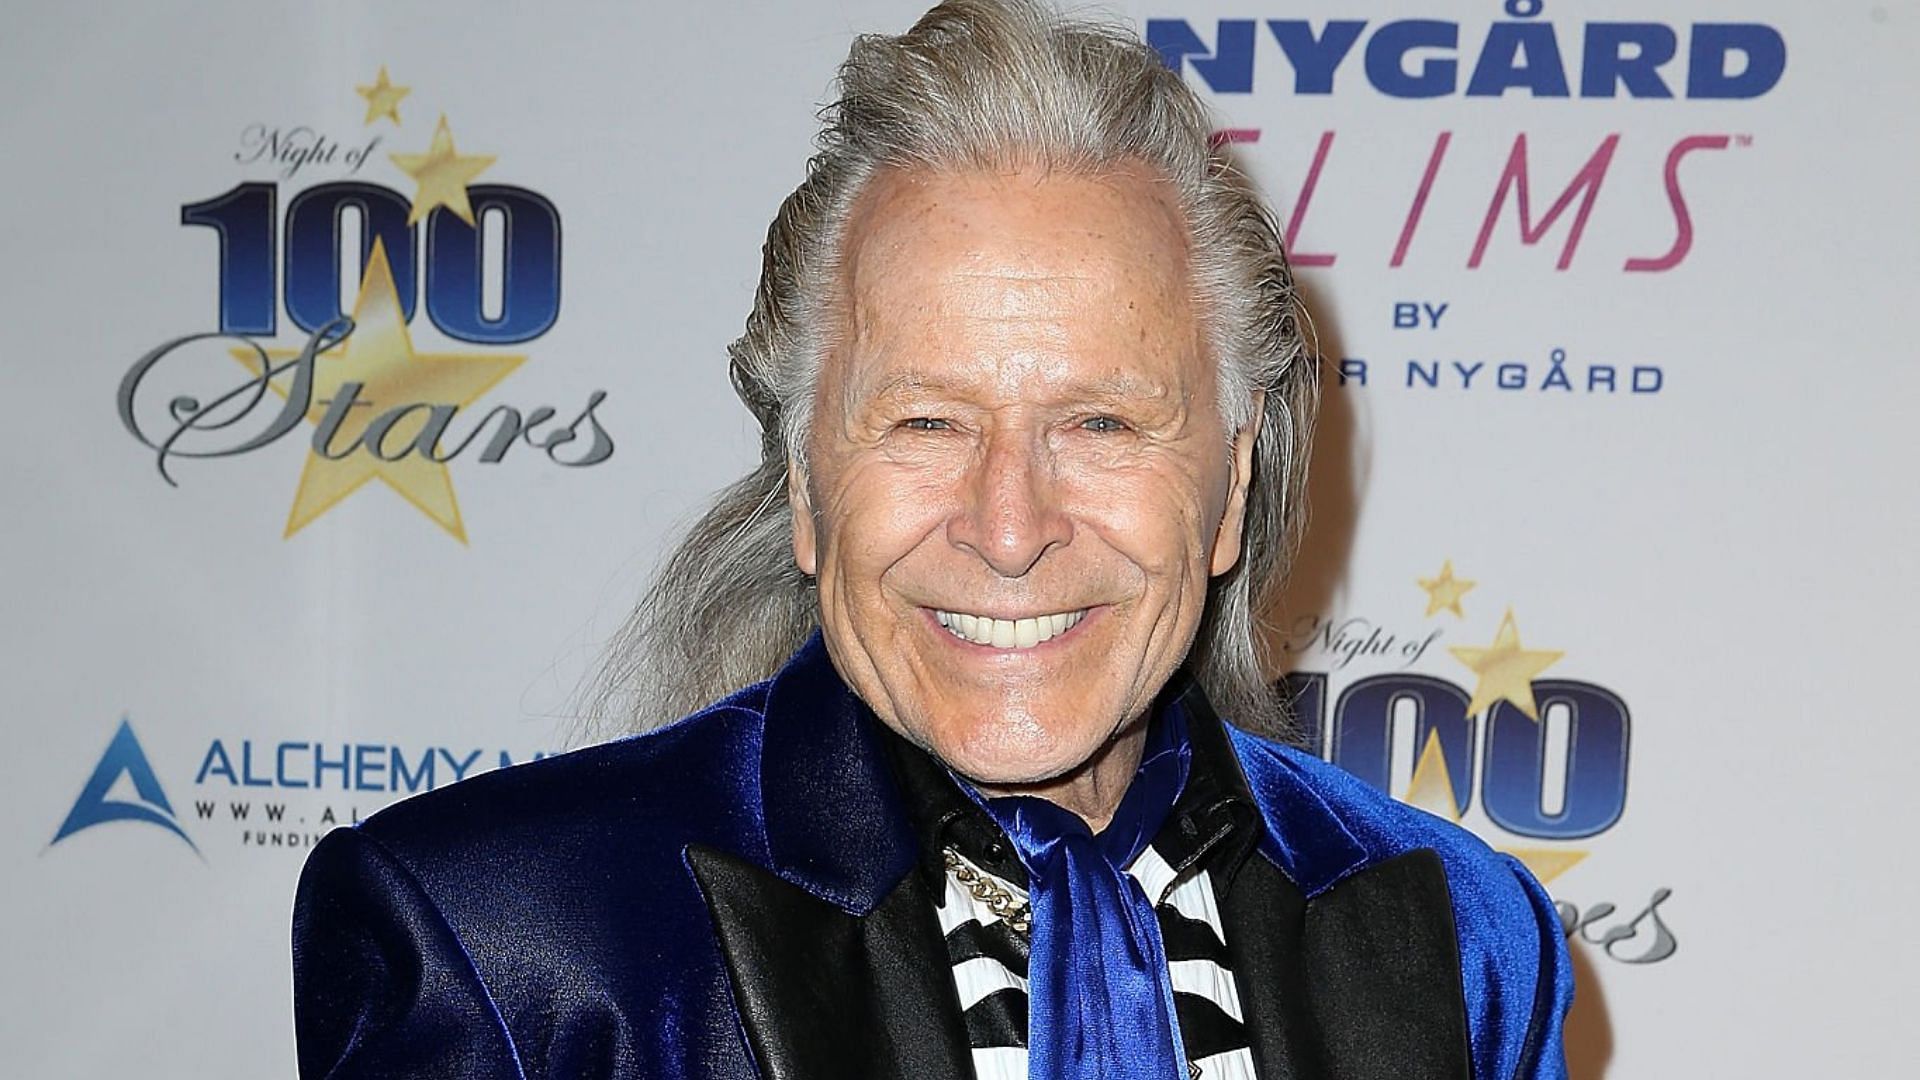 Peter Nygard is the former head of Nygard International, the largest producer of women&#039;s clothing in Canada (Image via Phillip Faraone/Getty Images)